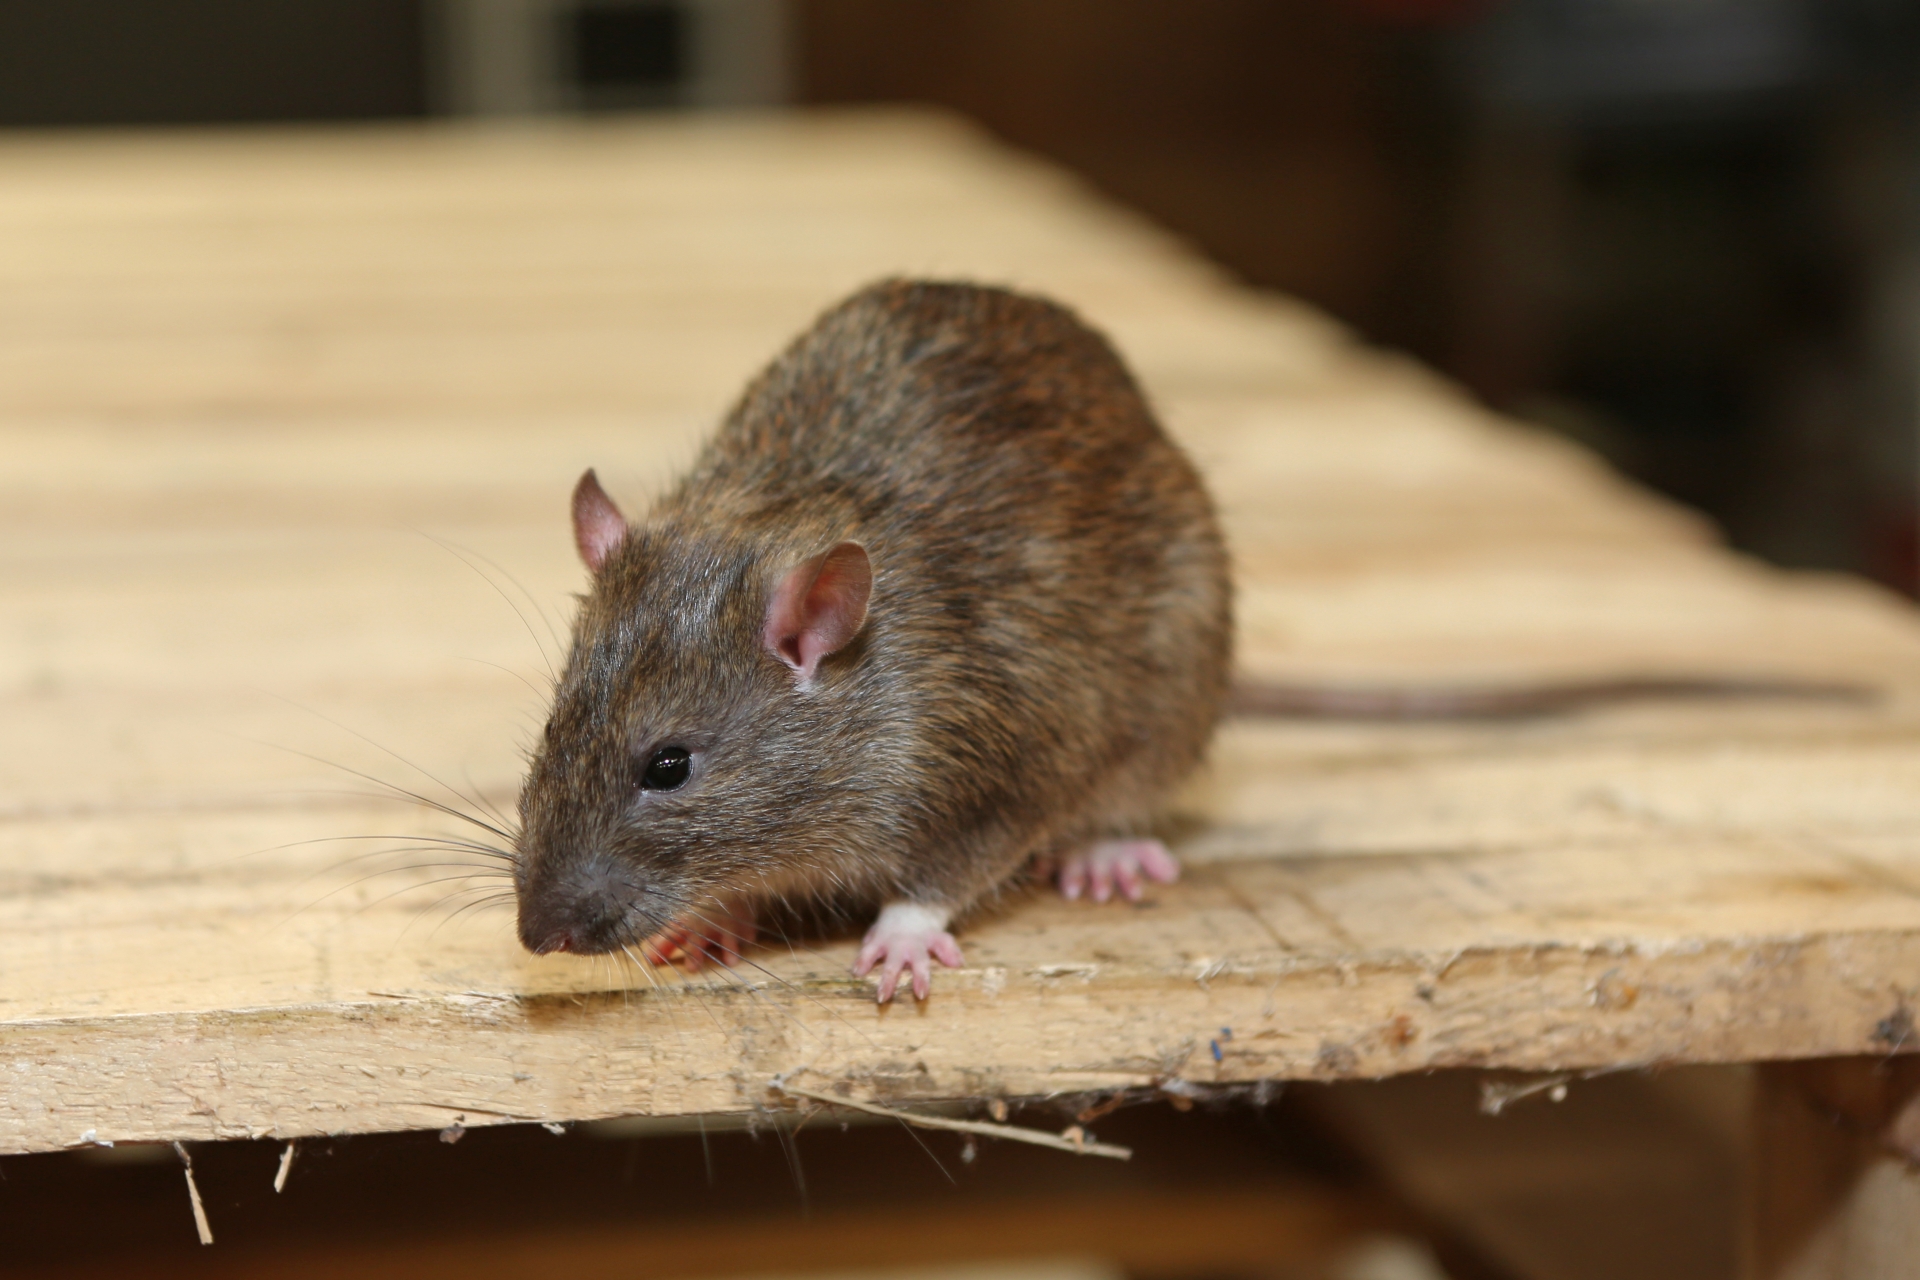 Rat Infestation, Pest Control in Moorgate, Liverpool Street, EC2. Call Now 020 8166 9746